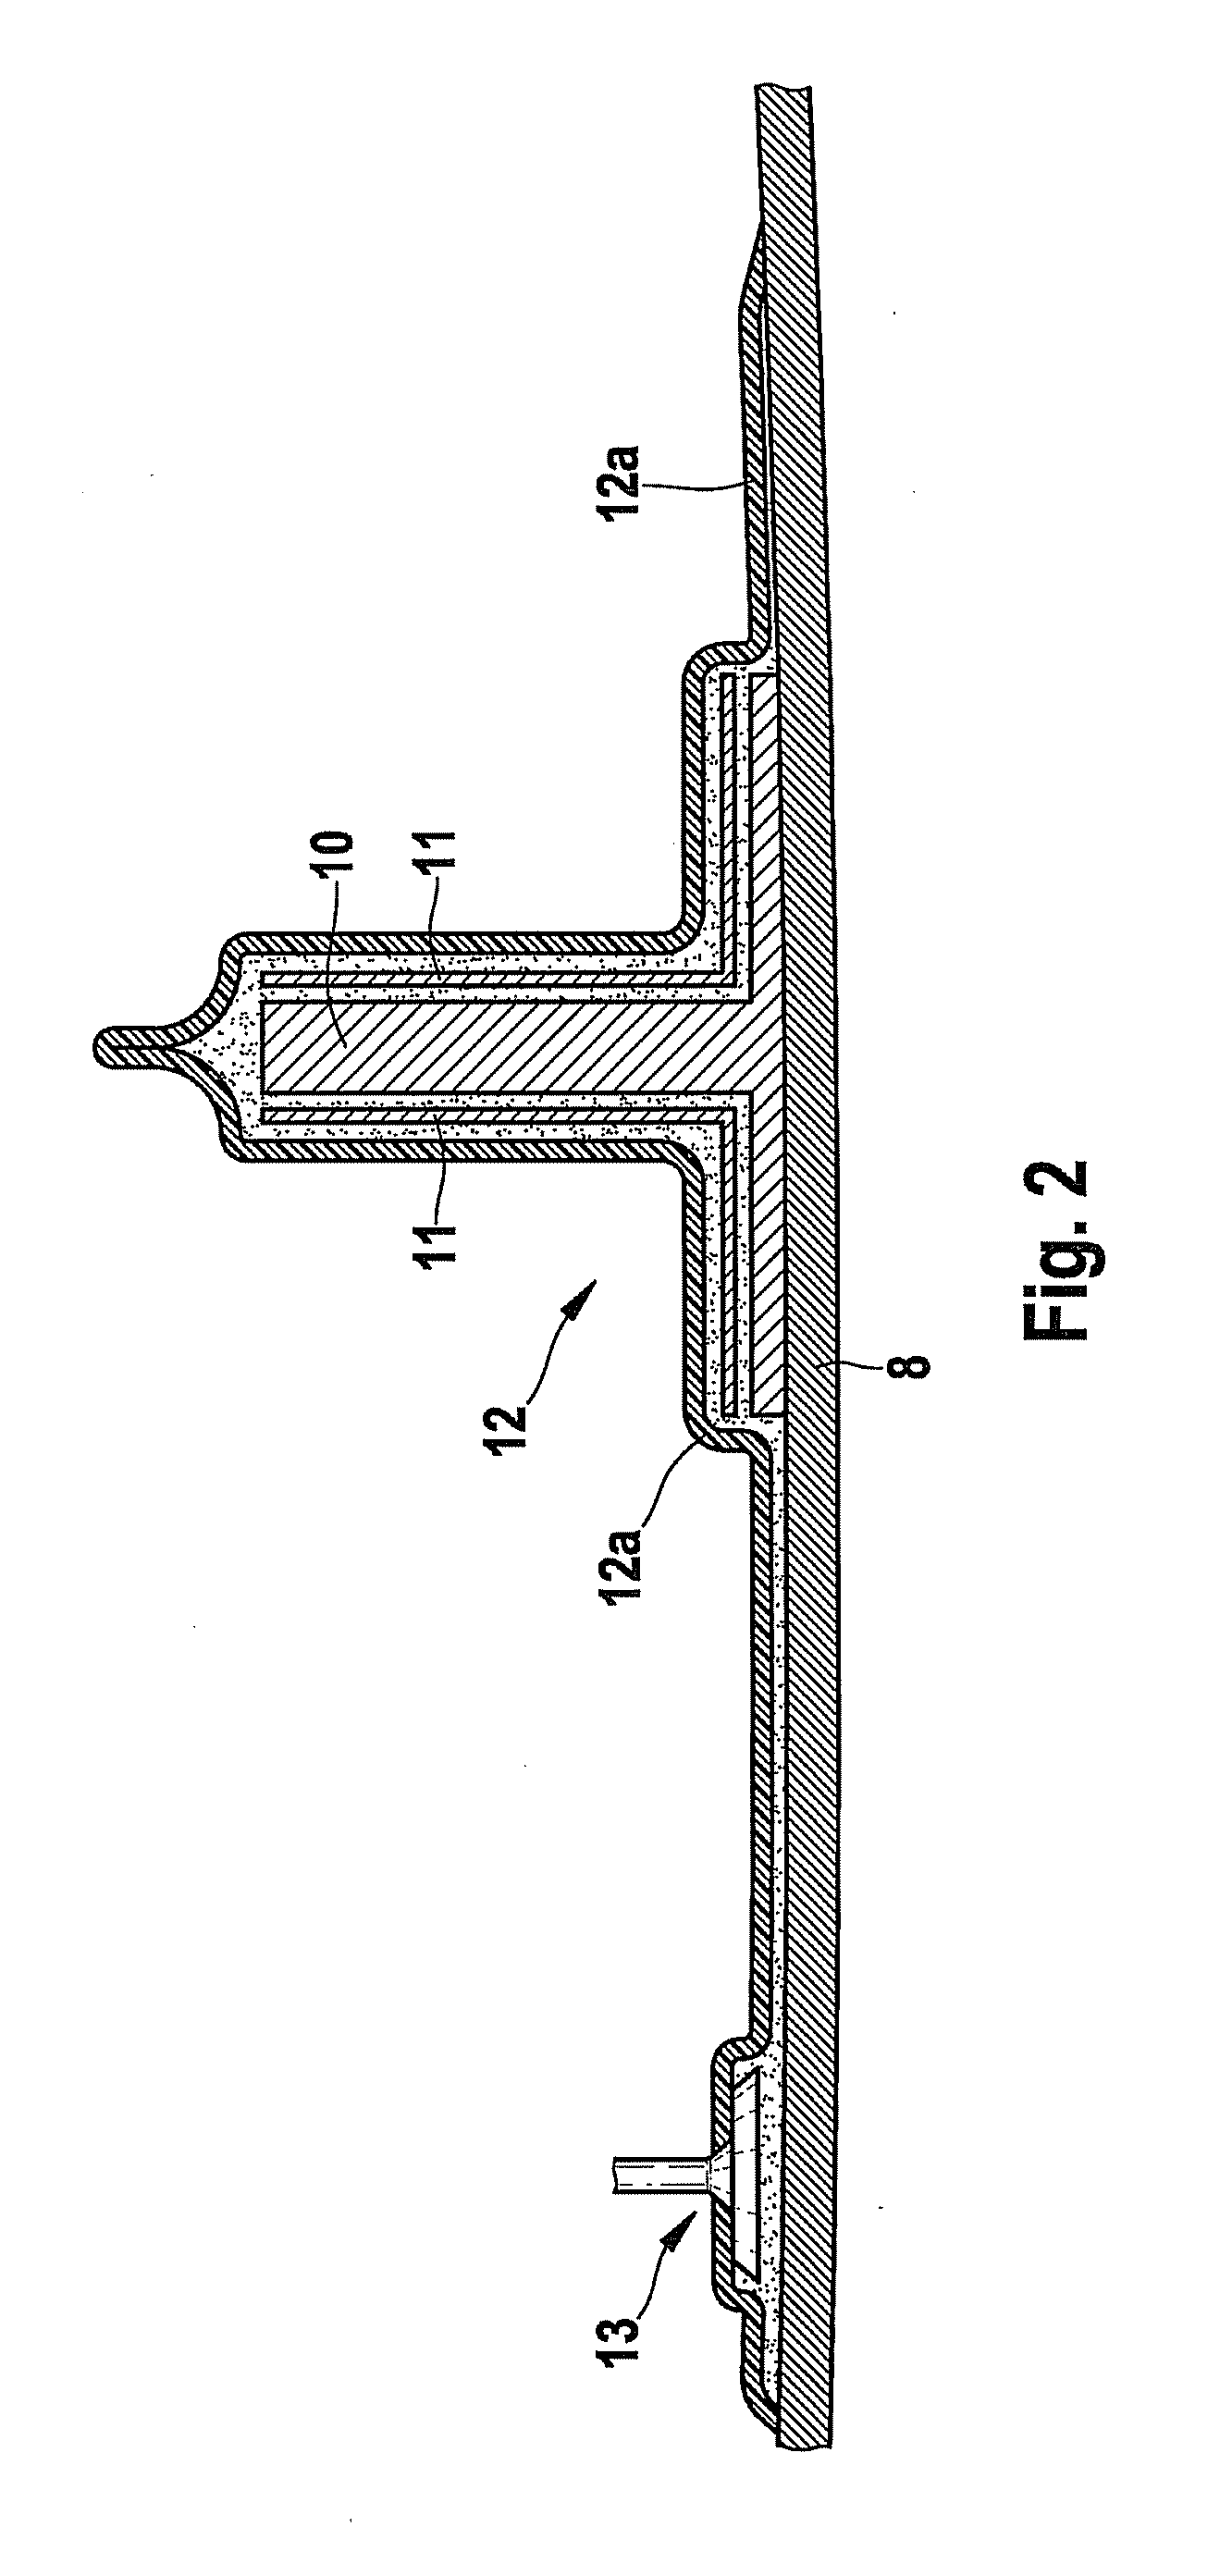 Method for at least partially reworking or replacing a reinforcement element of a fibre composite structure and associated connecting device